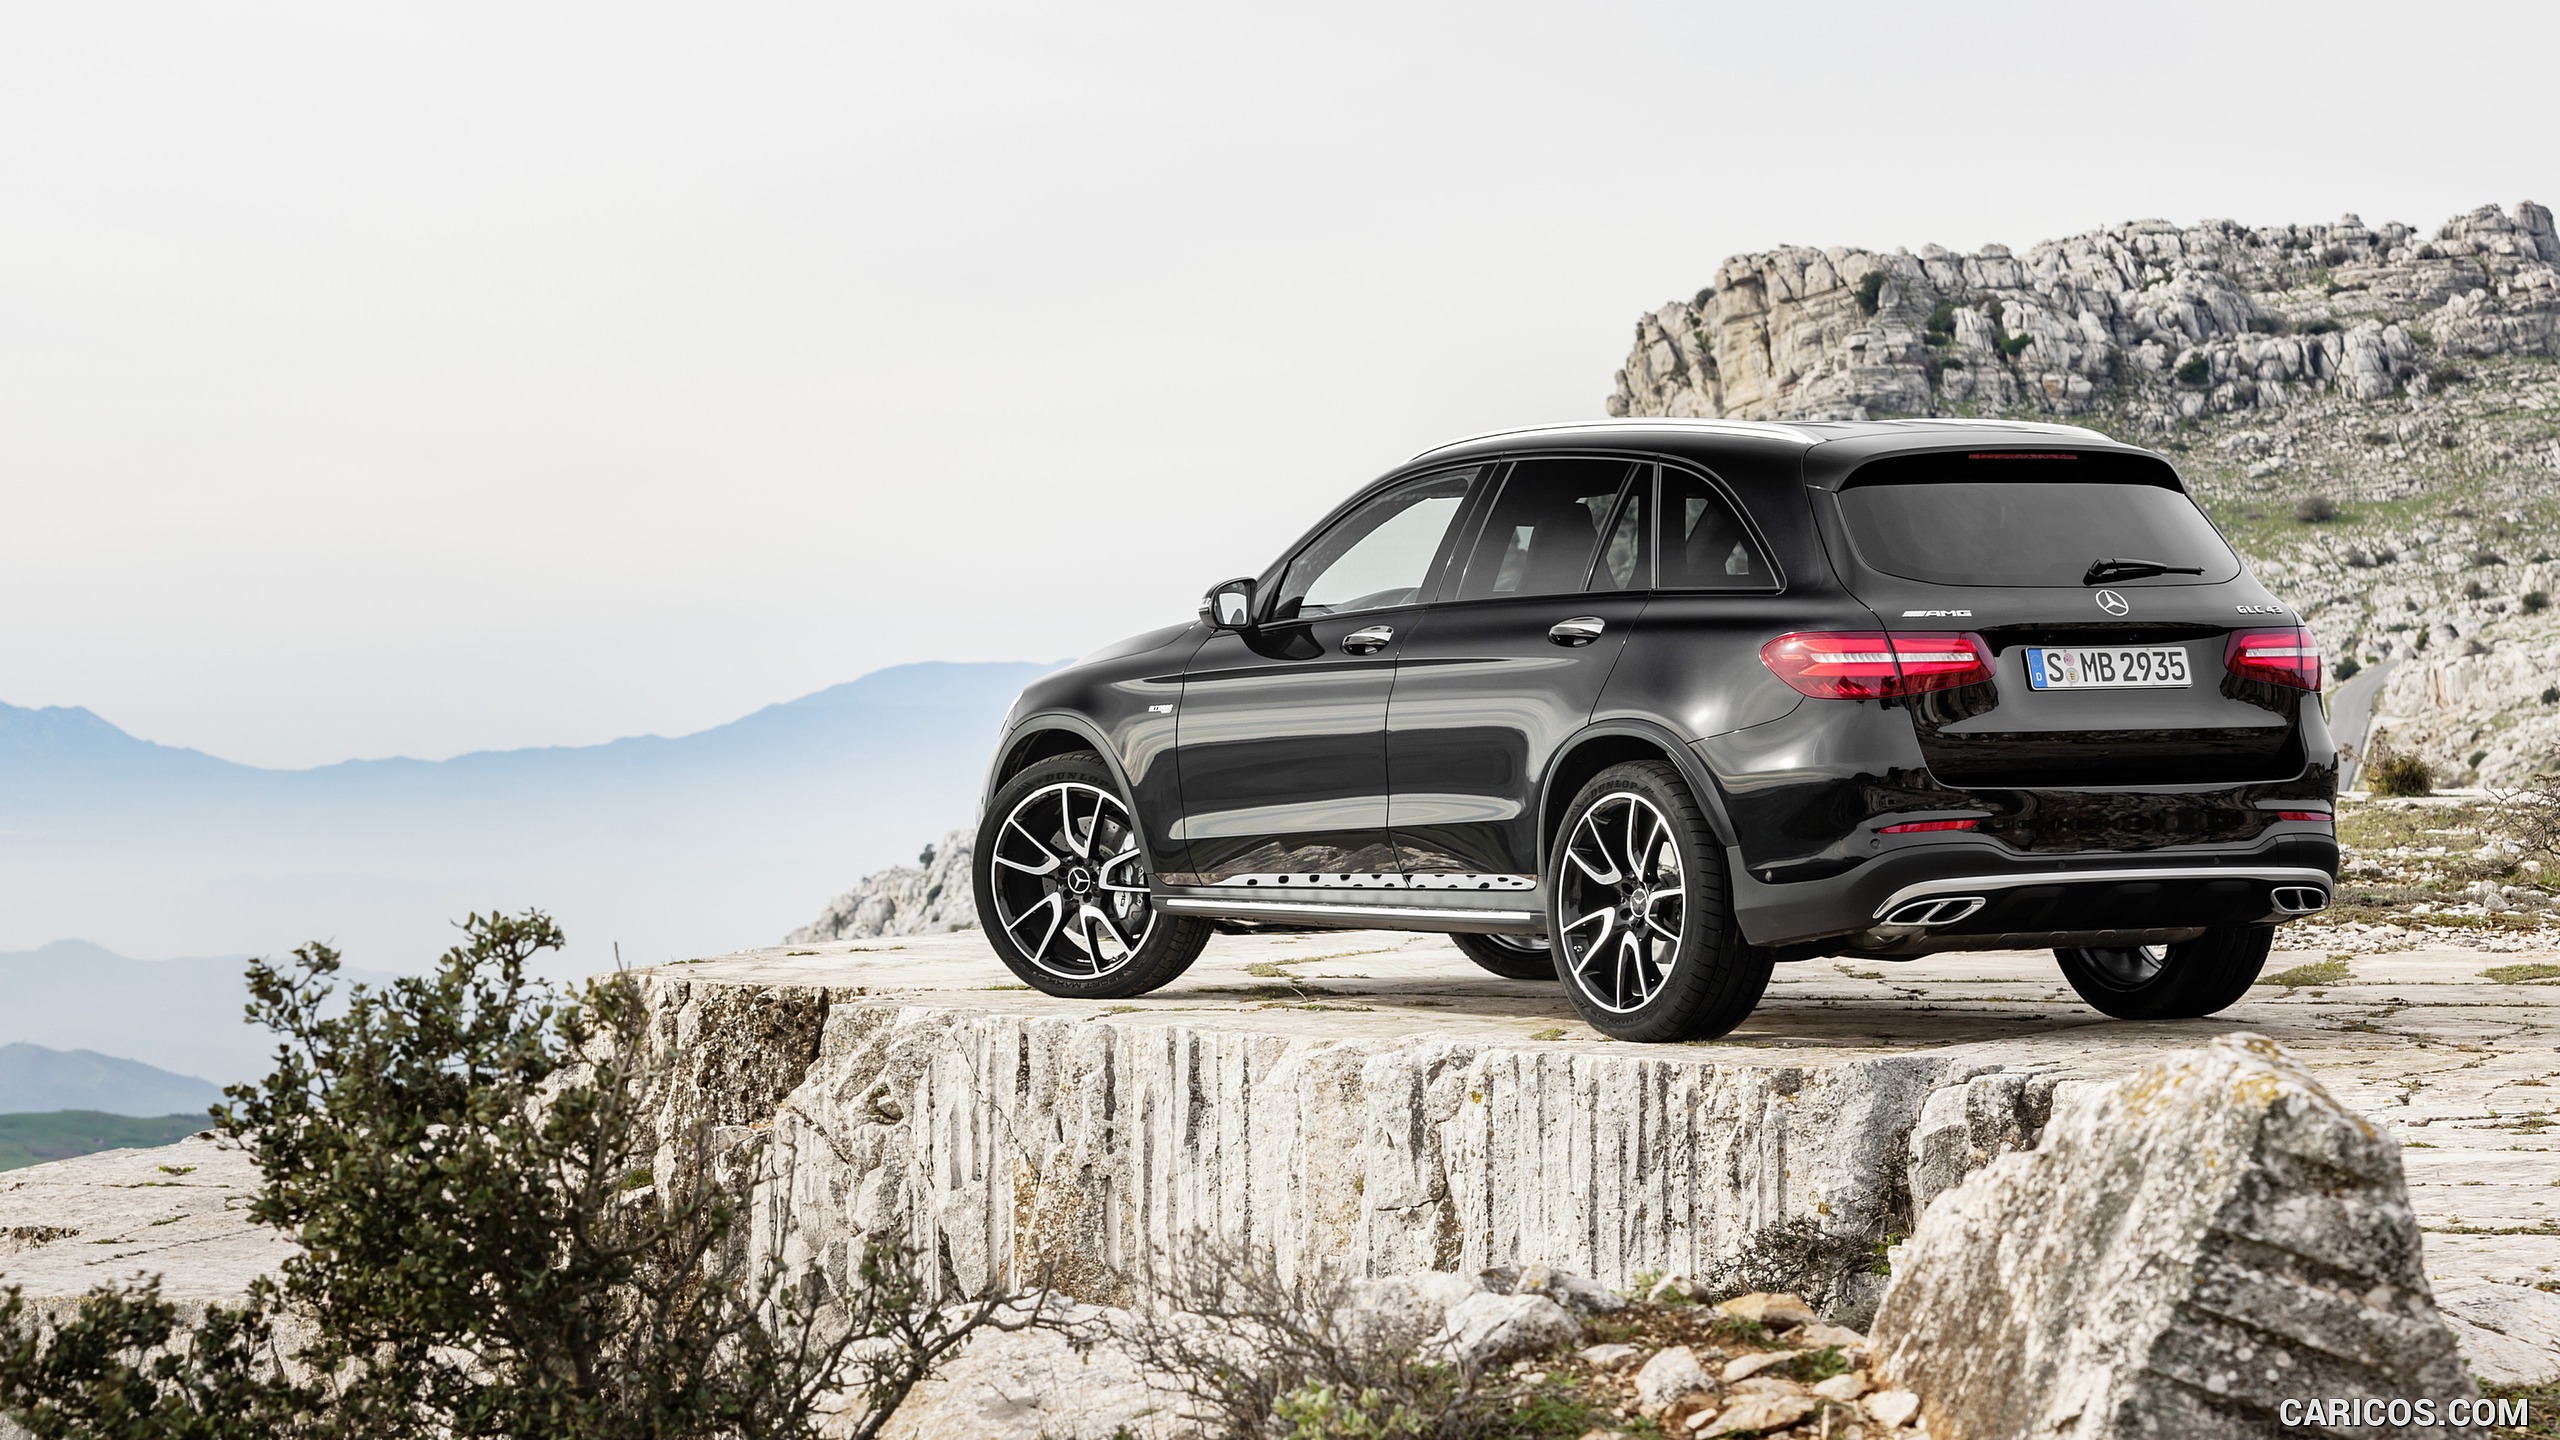 2017 Mercedes-AMG GLC 43 4MATIC (Chassis: X253, Color: Obsidian Black) - Rear, #2 of 108